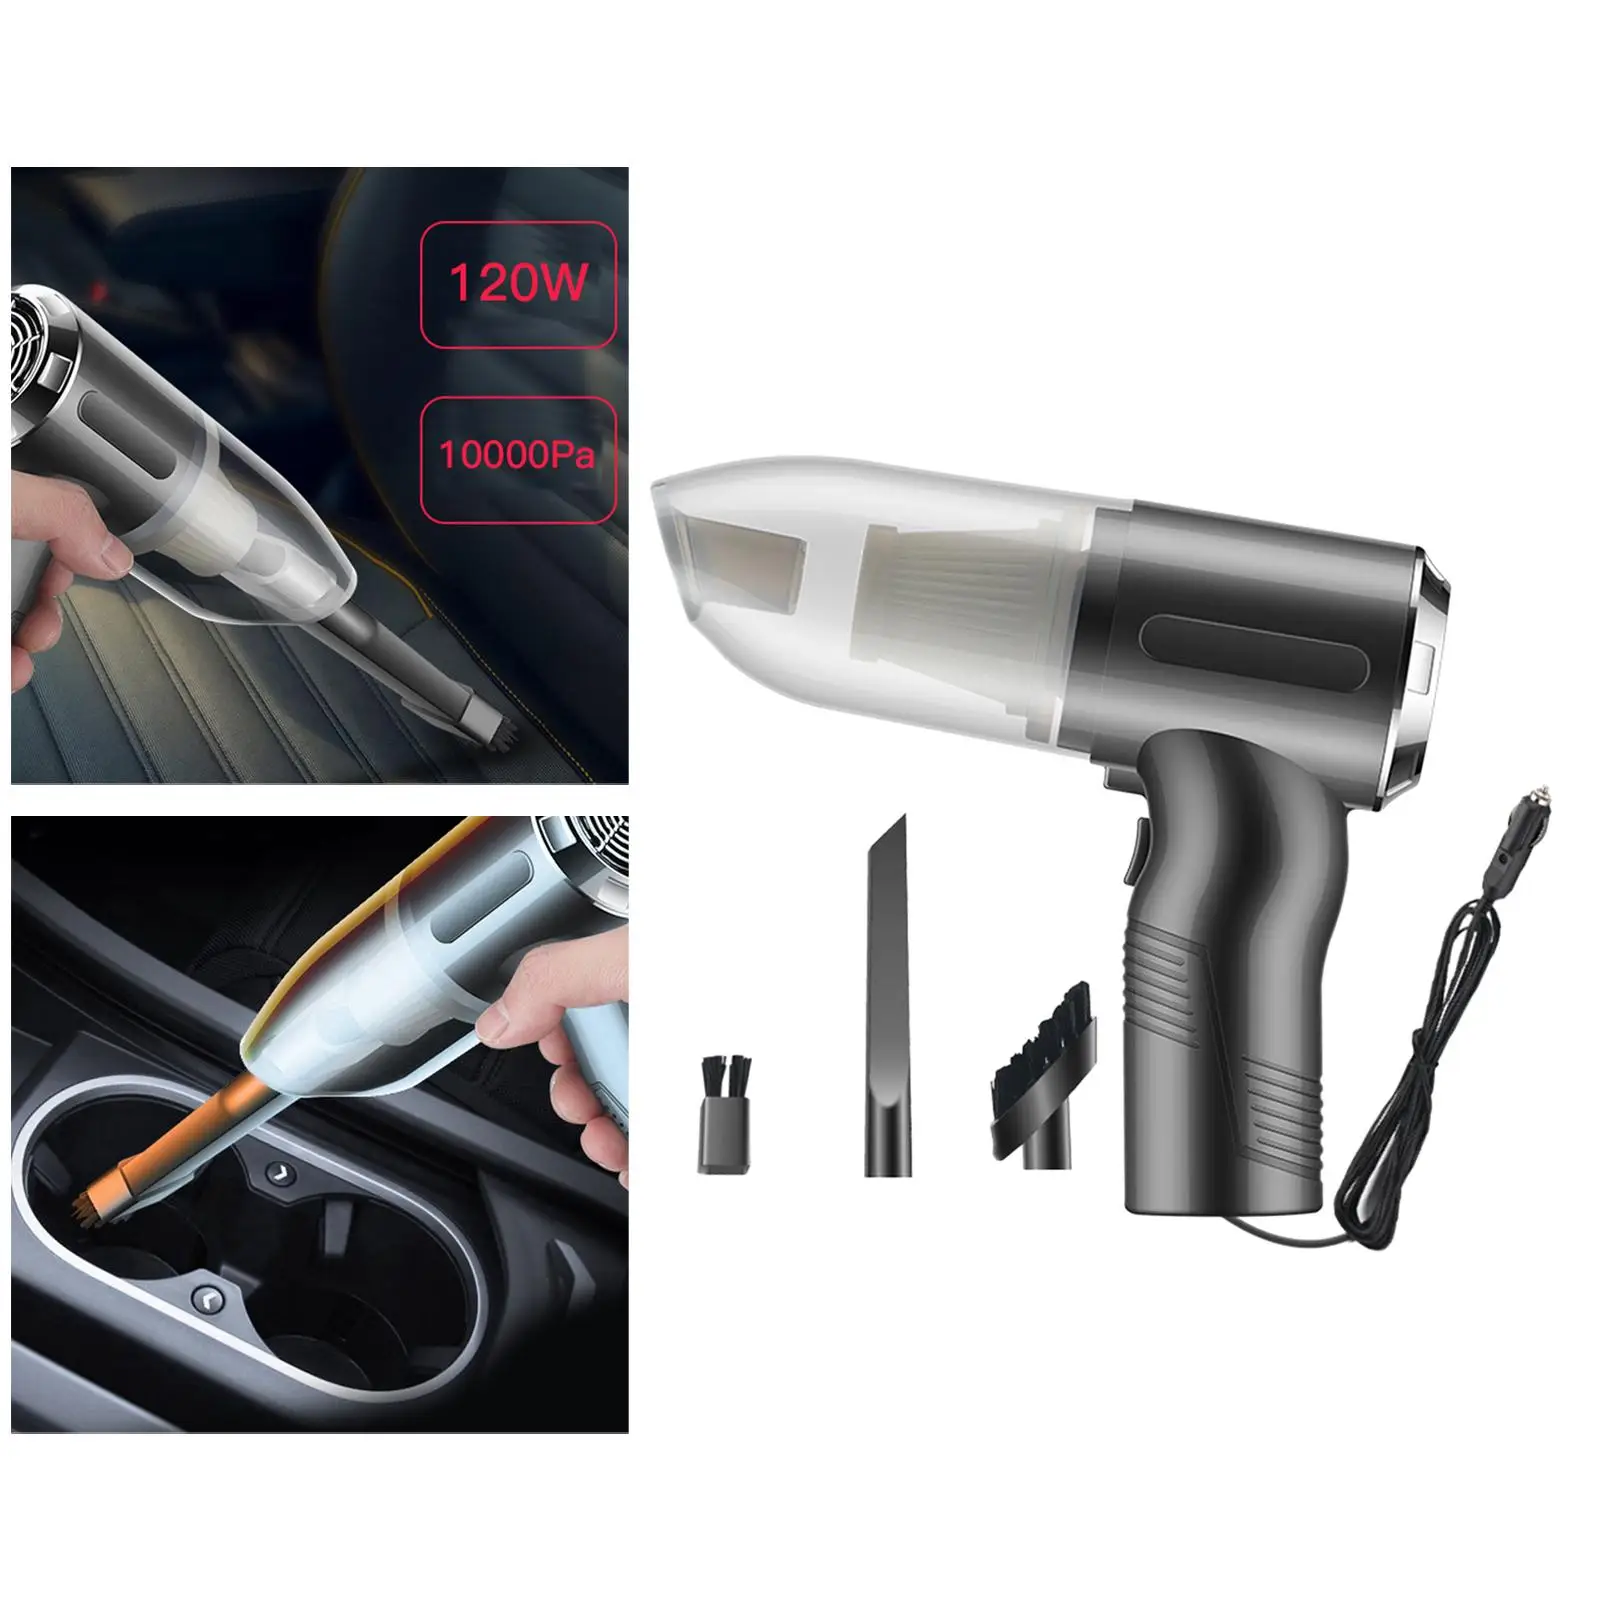 Portable Car Vacuum Cleaner 10000PA Strong Suction High Power Mini Vacuum for Vehicle, Pet Hair, Office, Sofa, Home